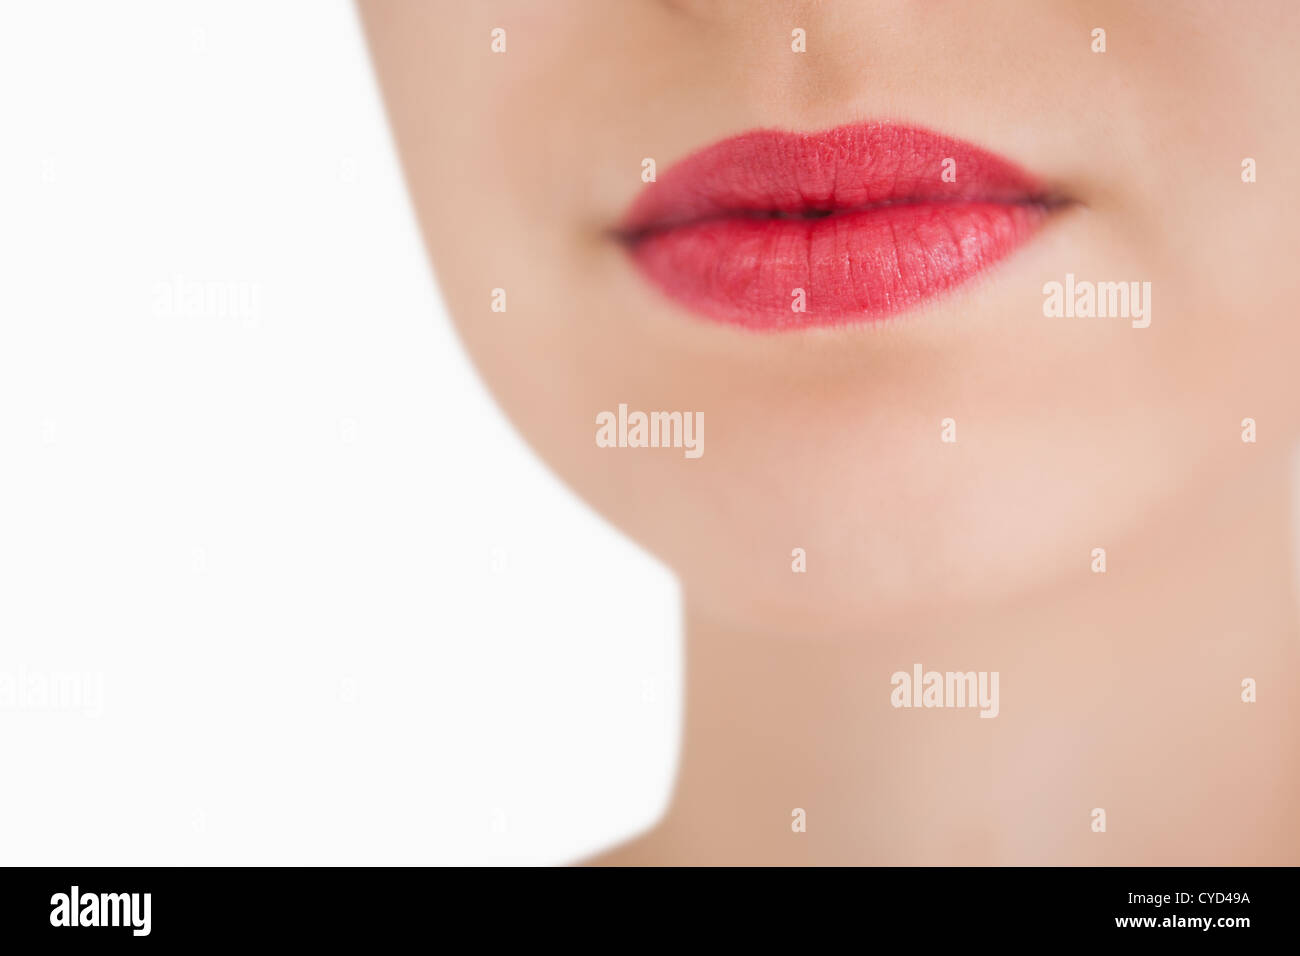 Woman wearing red lipstick against white background Stock Photo